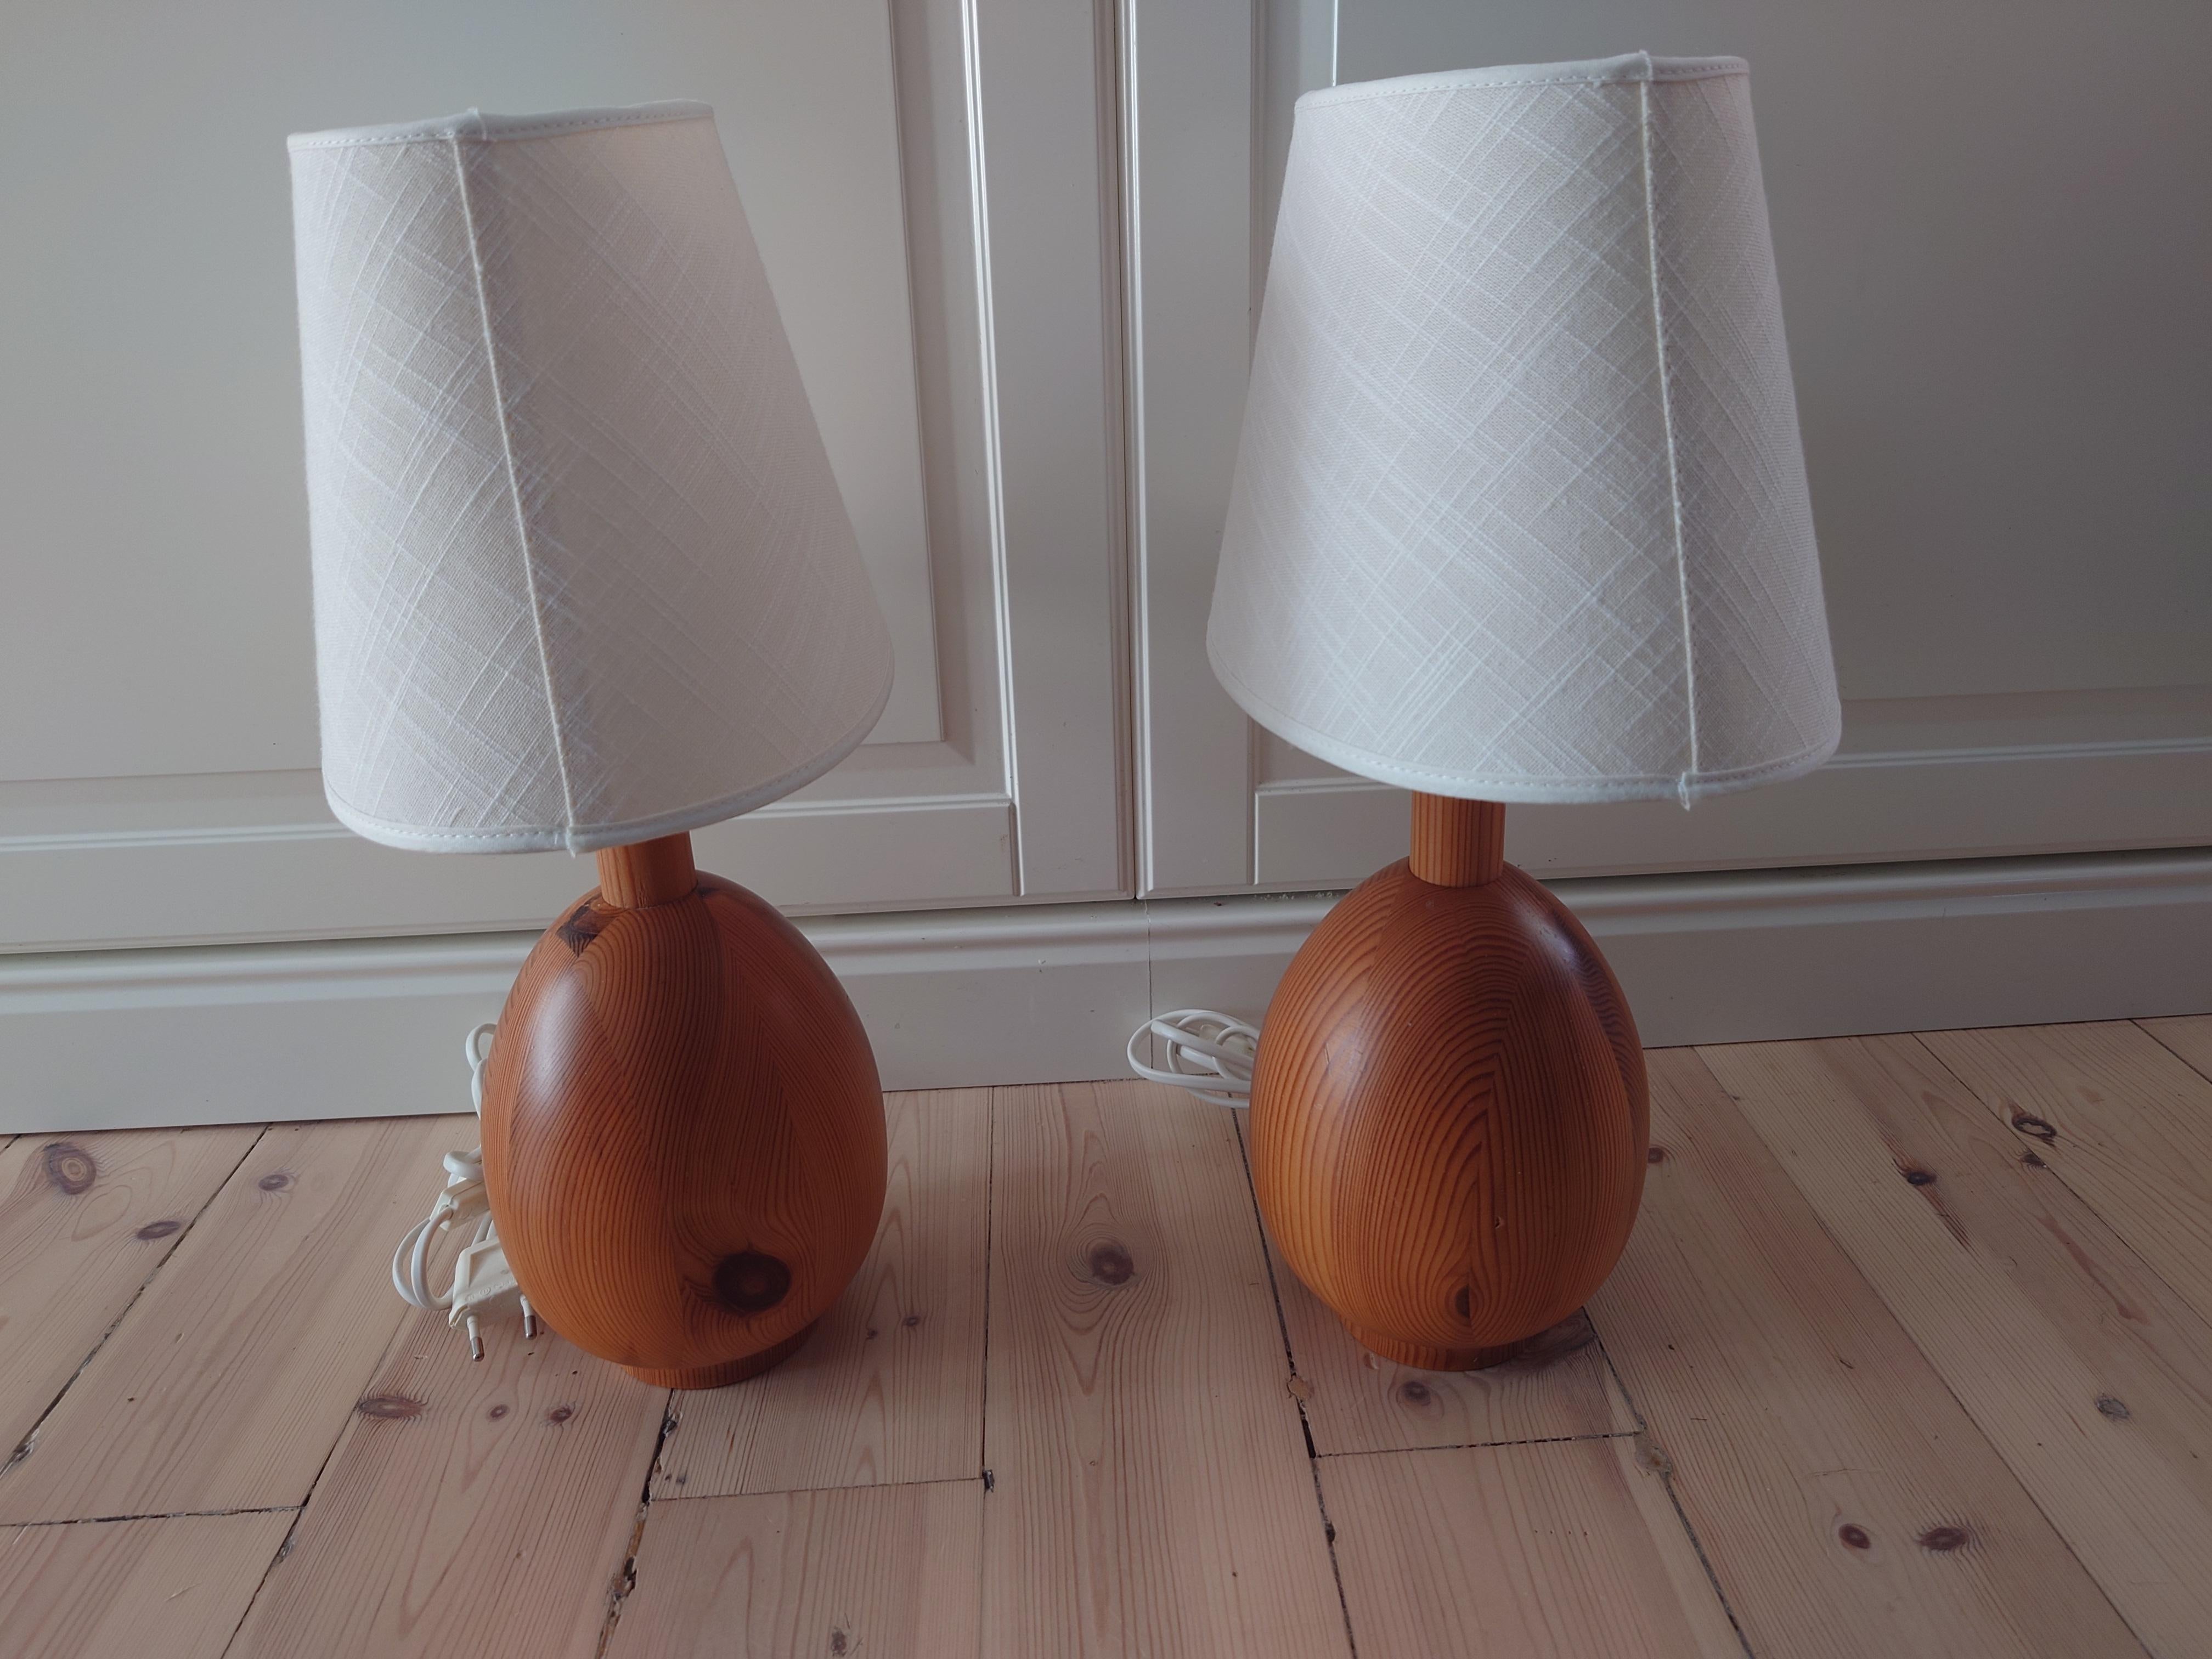 A pair Markslöjd Minimalist Table Lamps, Solid Pine, Kinna, Sweden, c. 1970s In Good Condition For Sale In Boden, SE